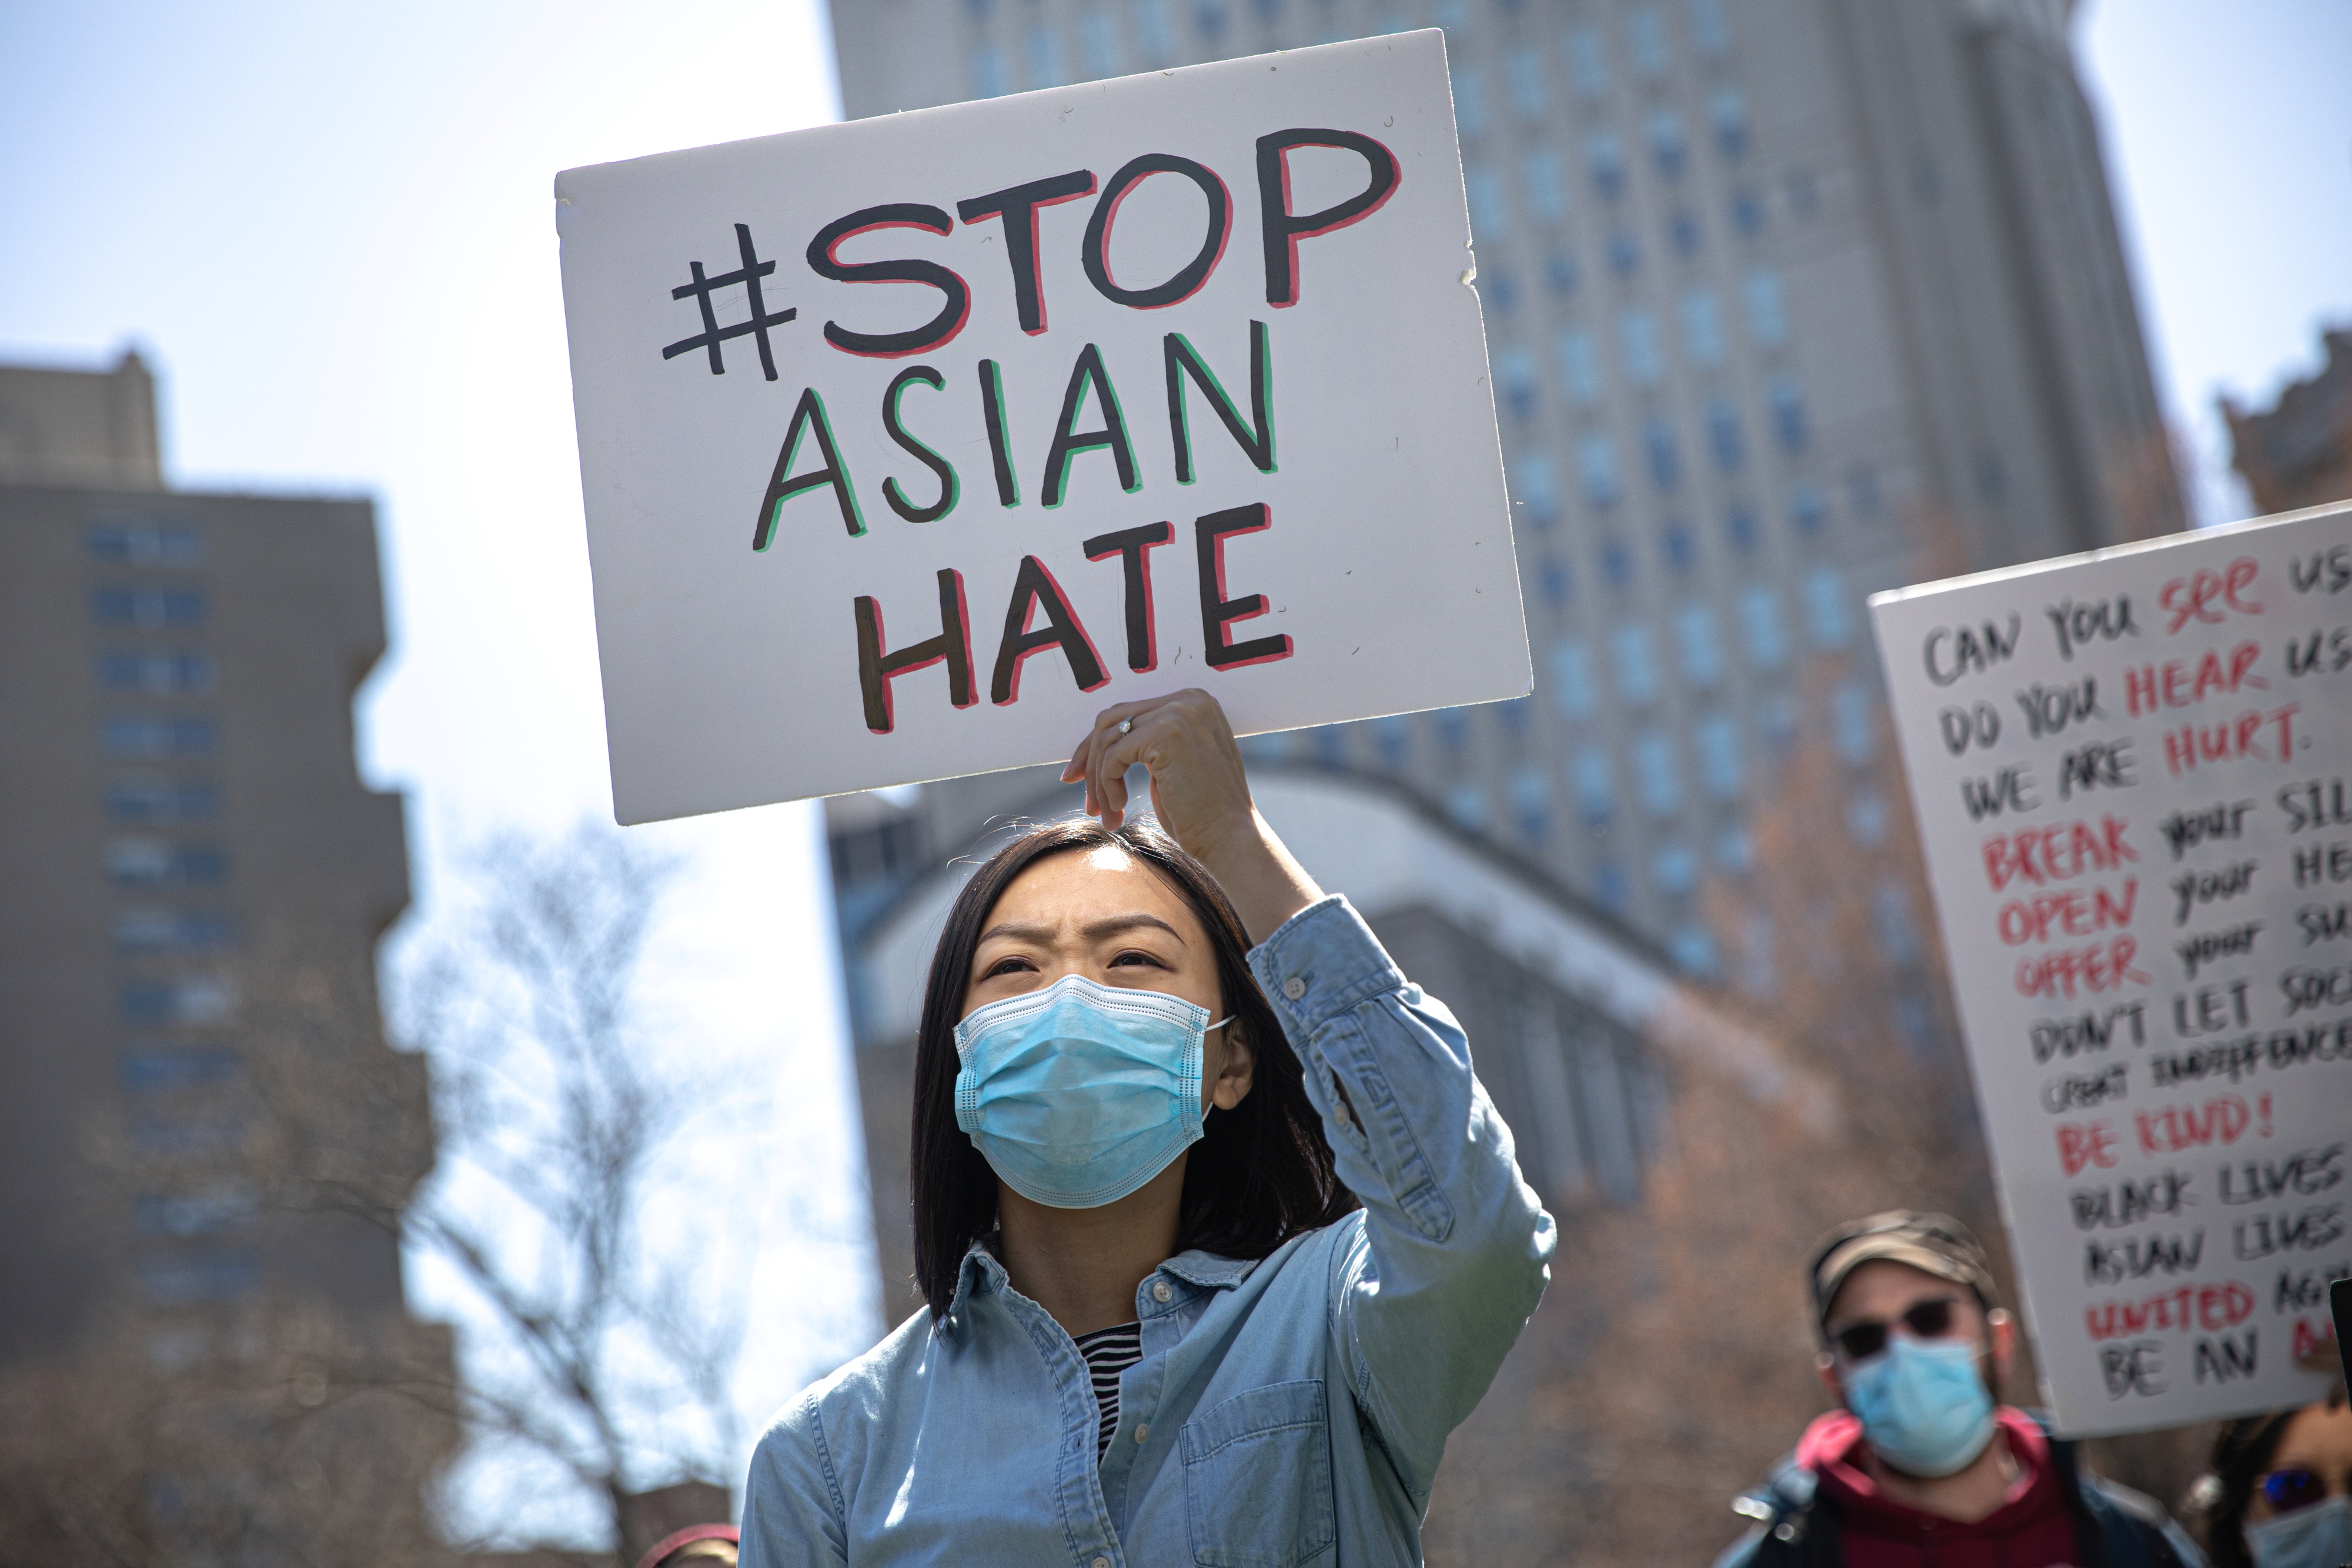 A woman holds a placard as she participates in a Stop Asian Hate rally at Columbus Park in New York City, U.S., April 3, 2021. REUTERS/Jeenah Moon